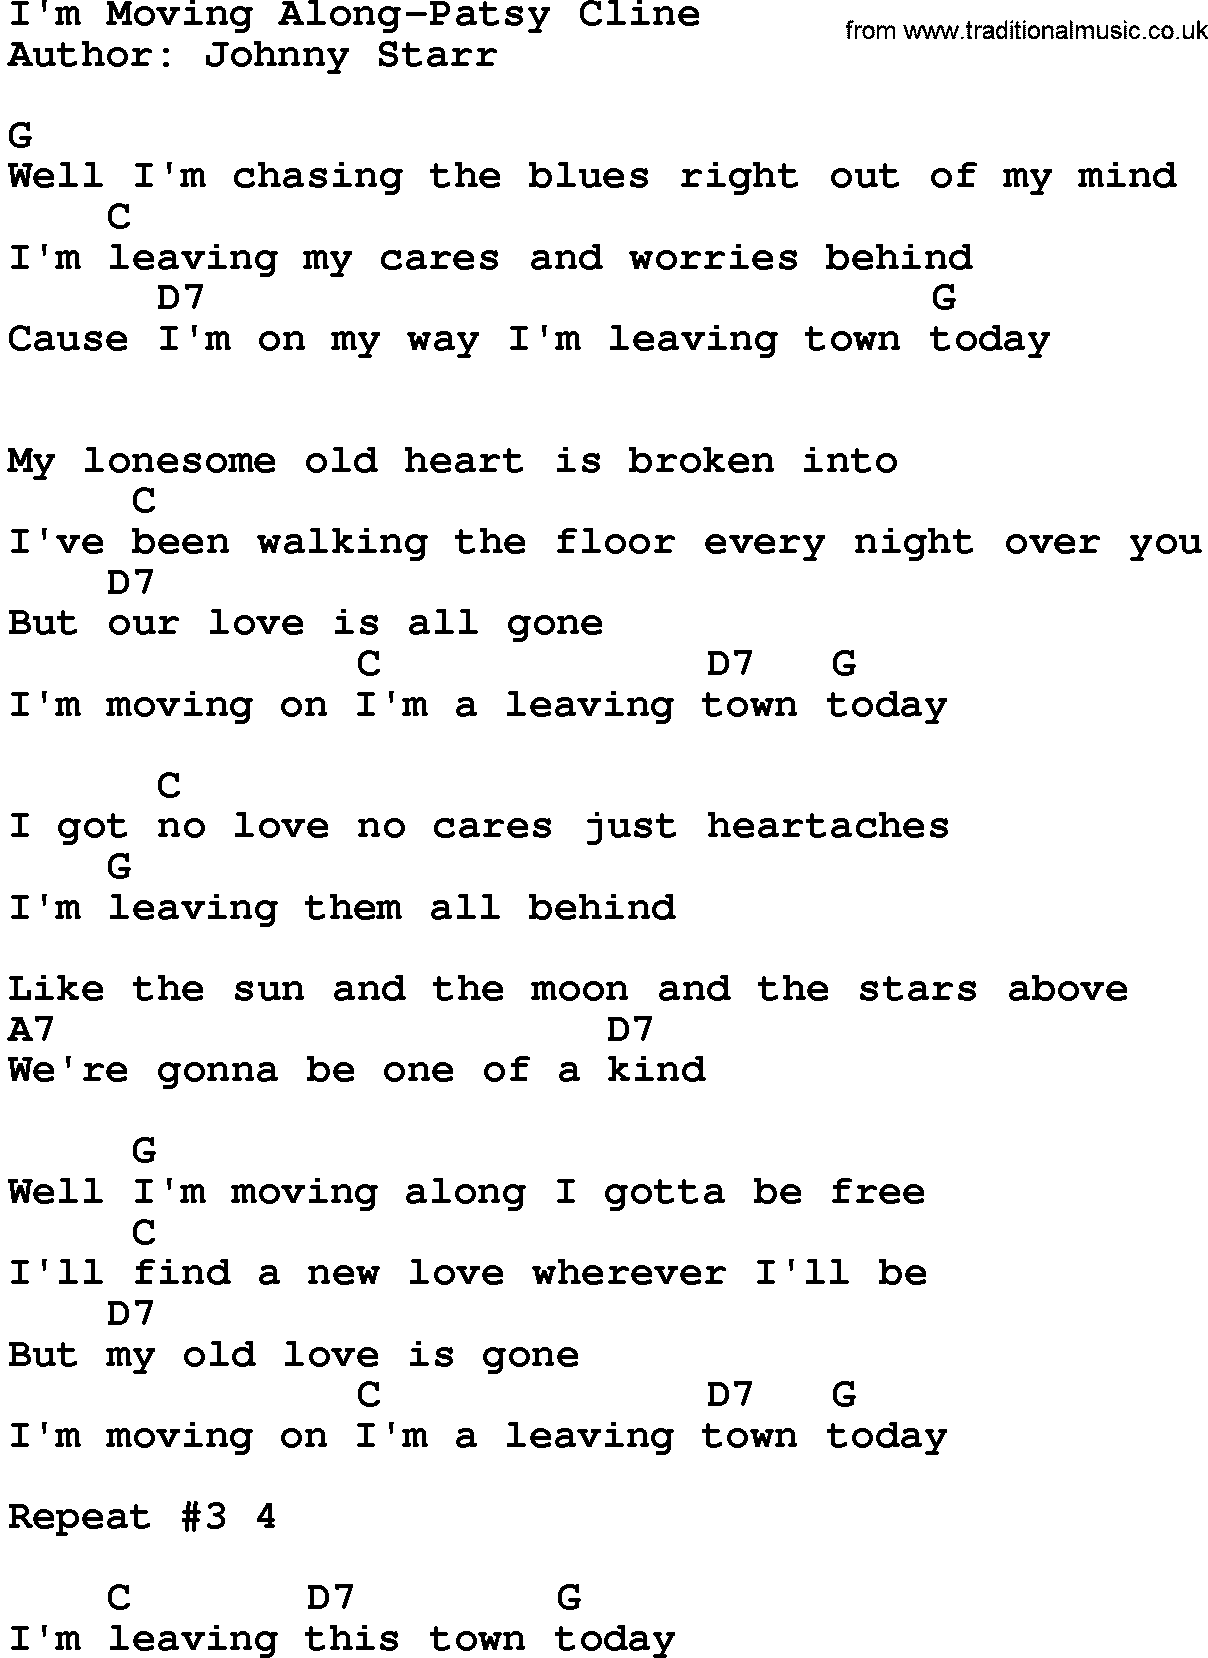 Country music song: I'm Moving Along-Patsy Cline lyrics and chords